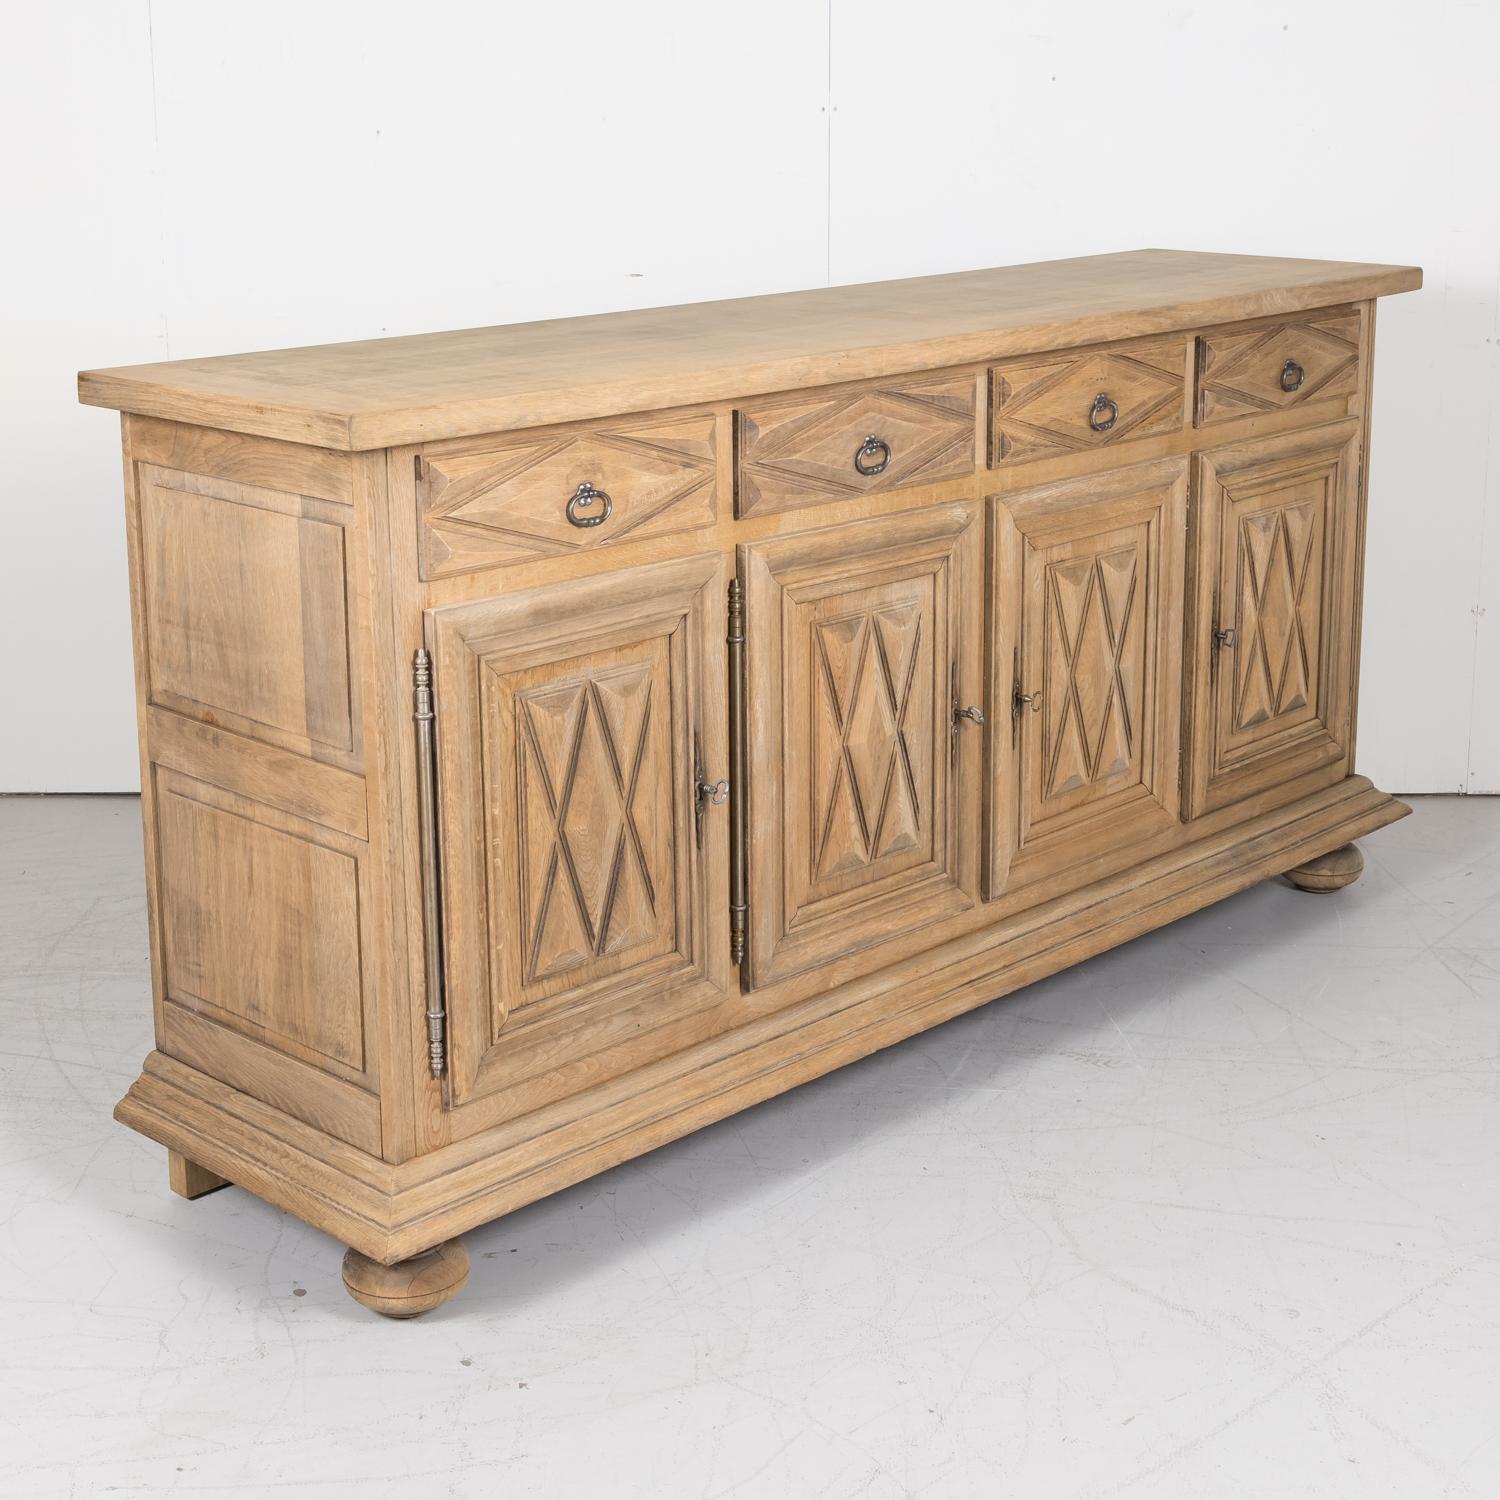 Early 20th century French Louis XIII style bleached enfilade buffet handcrafted of solid old growth oak by talented artisans in Toulouse, circa 1920s, having a rectangular top above four carved drawers with lozenge motifs over four doors with raised